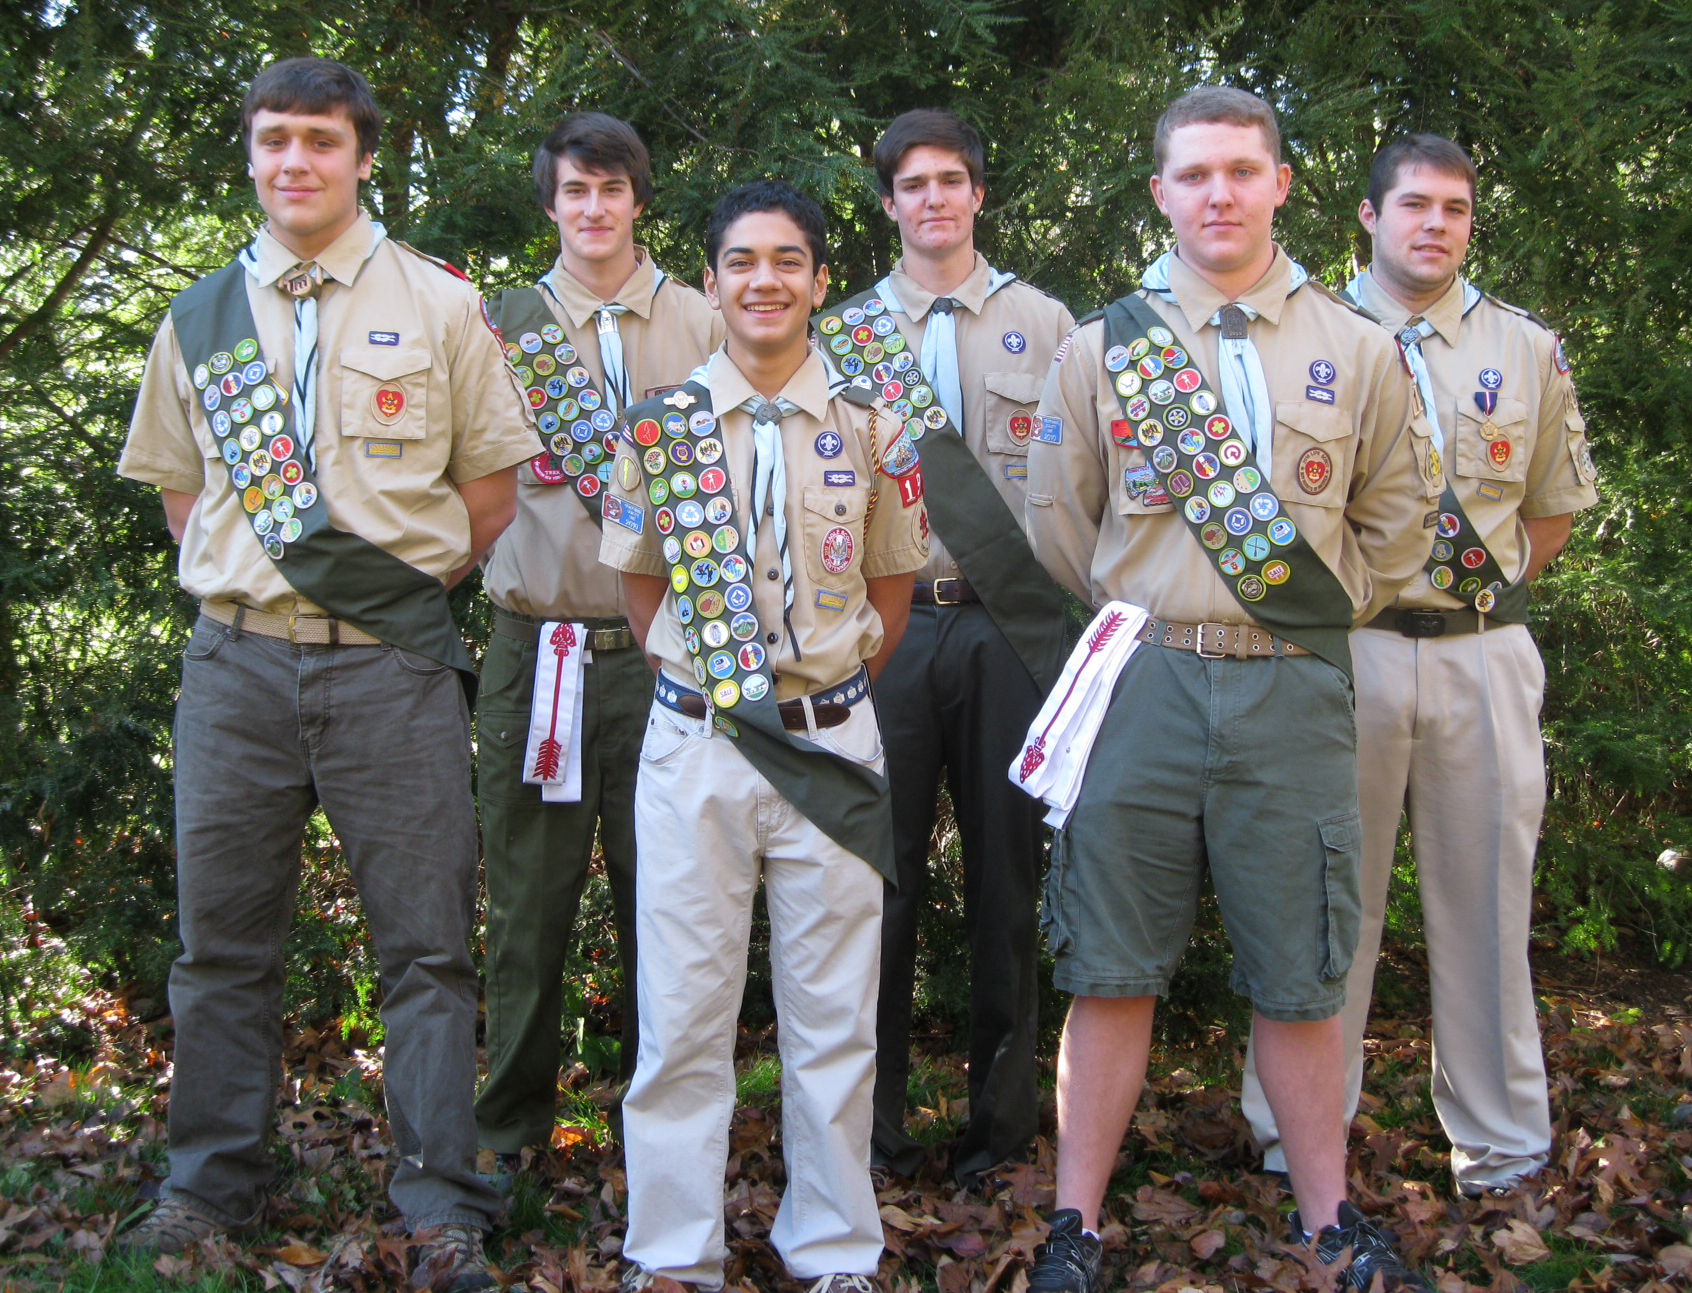 Local troop produces six Eagle Scouts